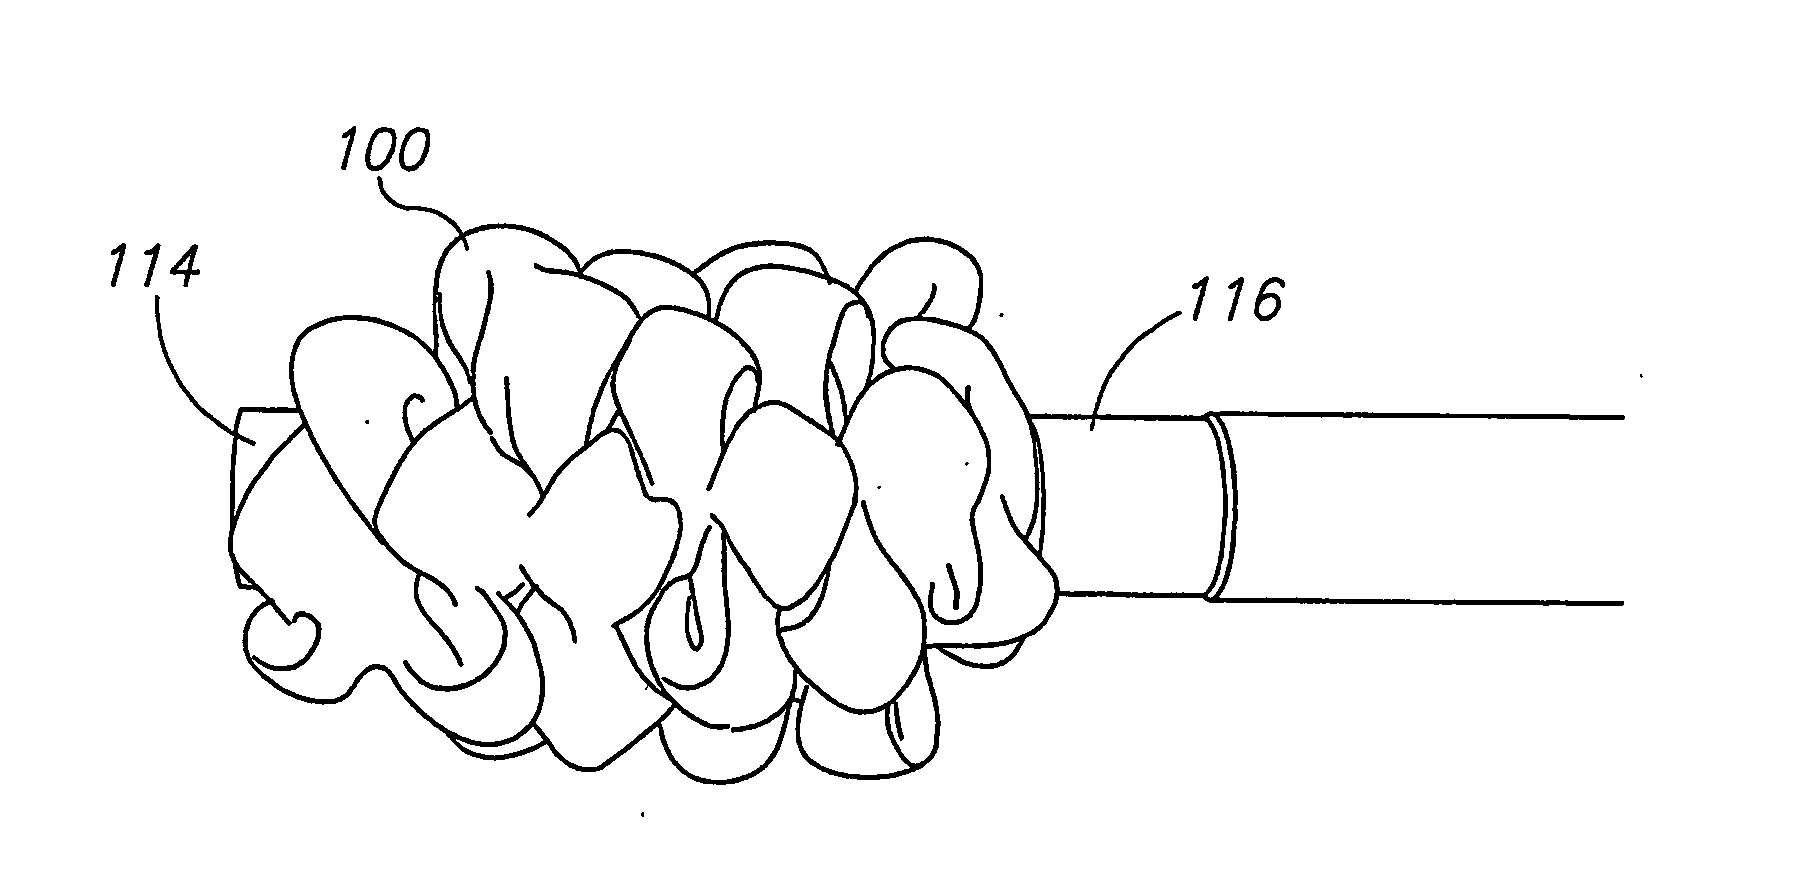 Deformable tools and implants